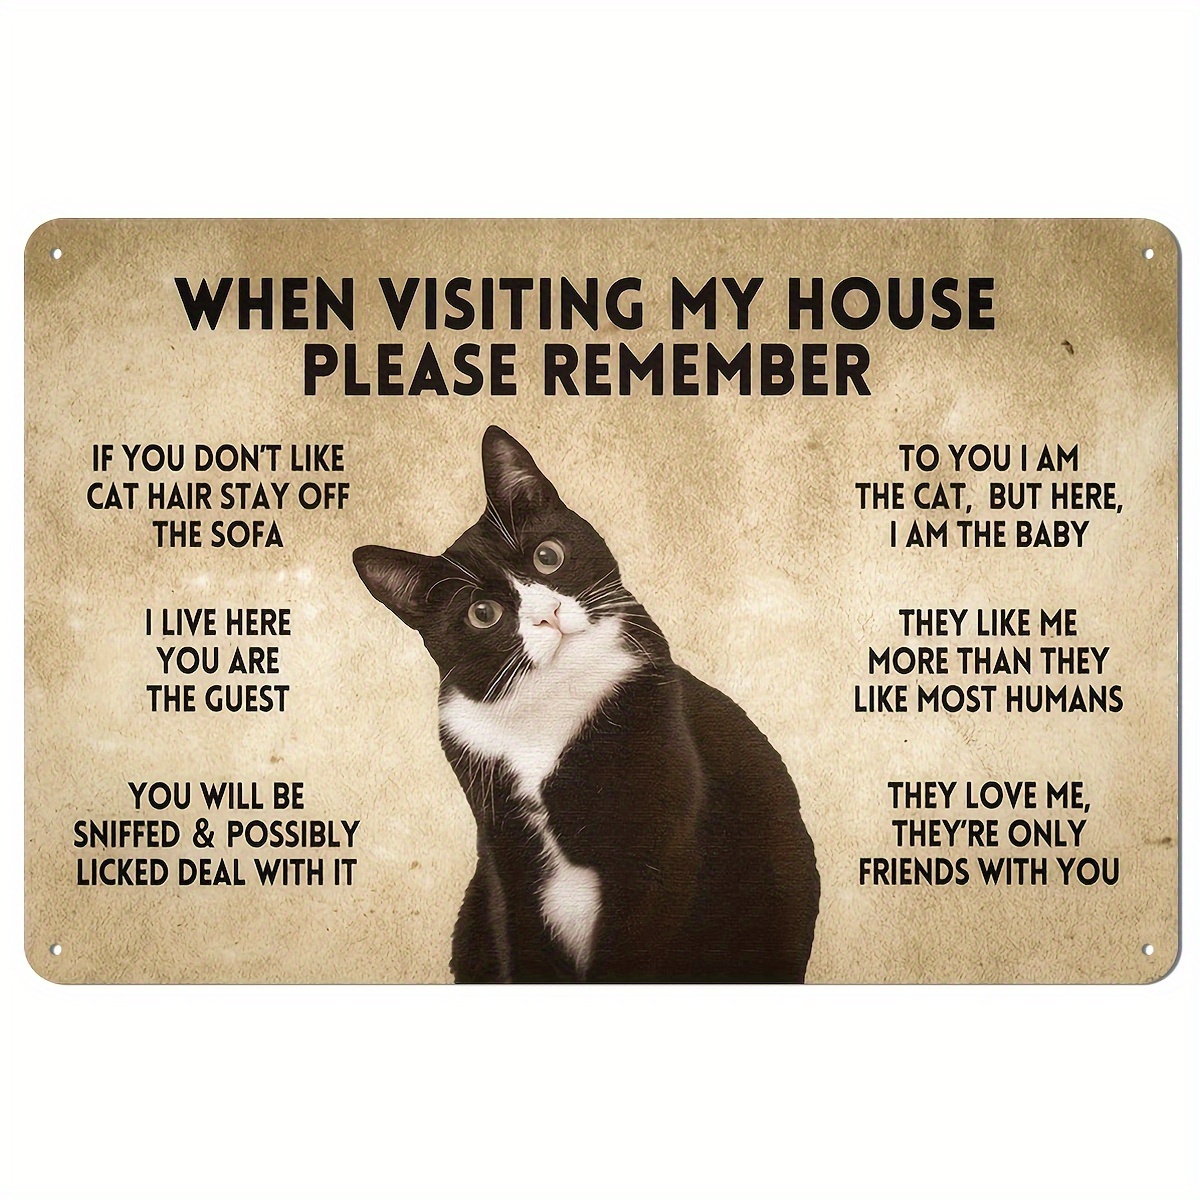 1pc funny tuxedo cat rules metal sign 8x12inch when visiting my house please remember black cat apartment decor for cat lover retro room decor caution sign 0